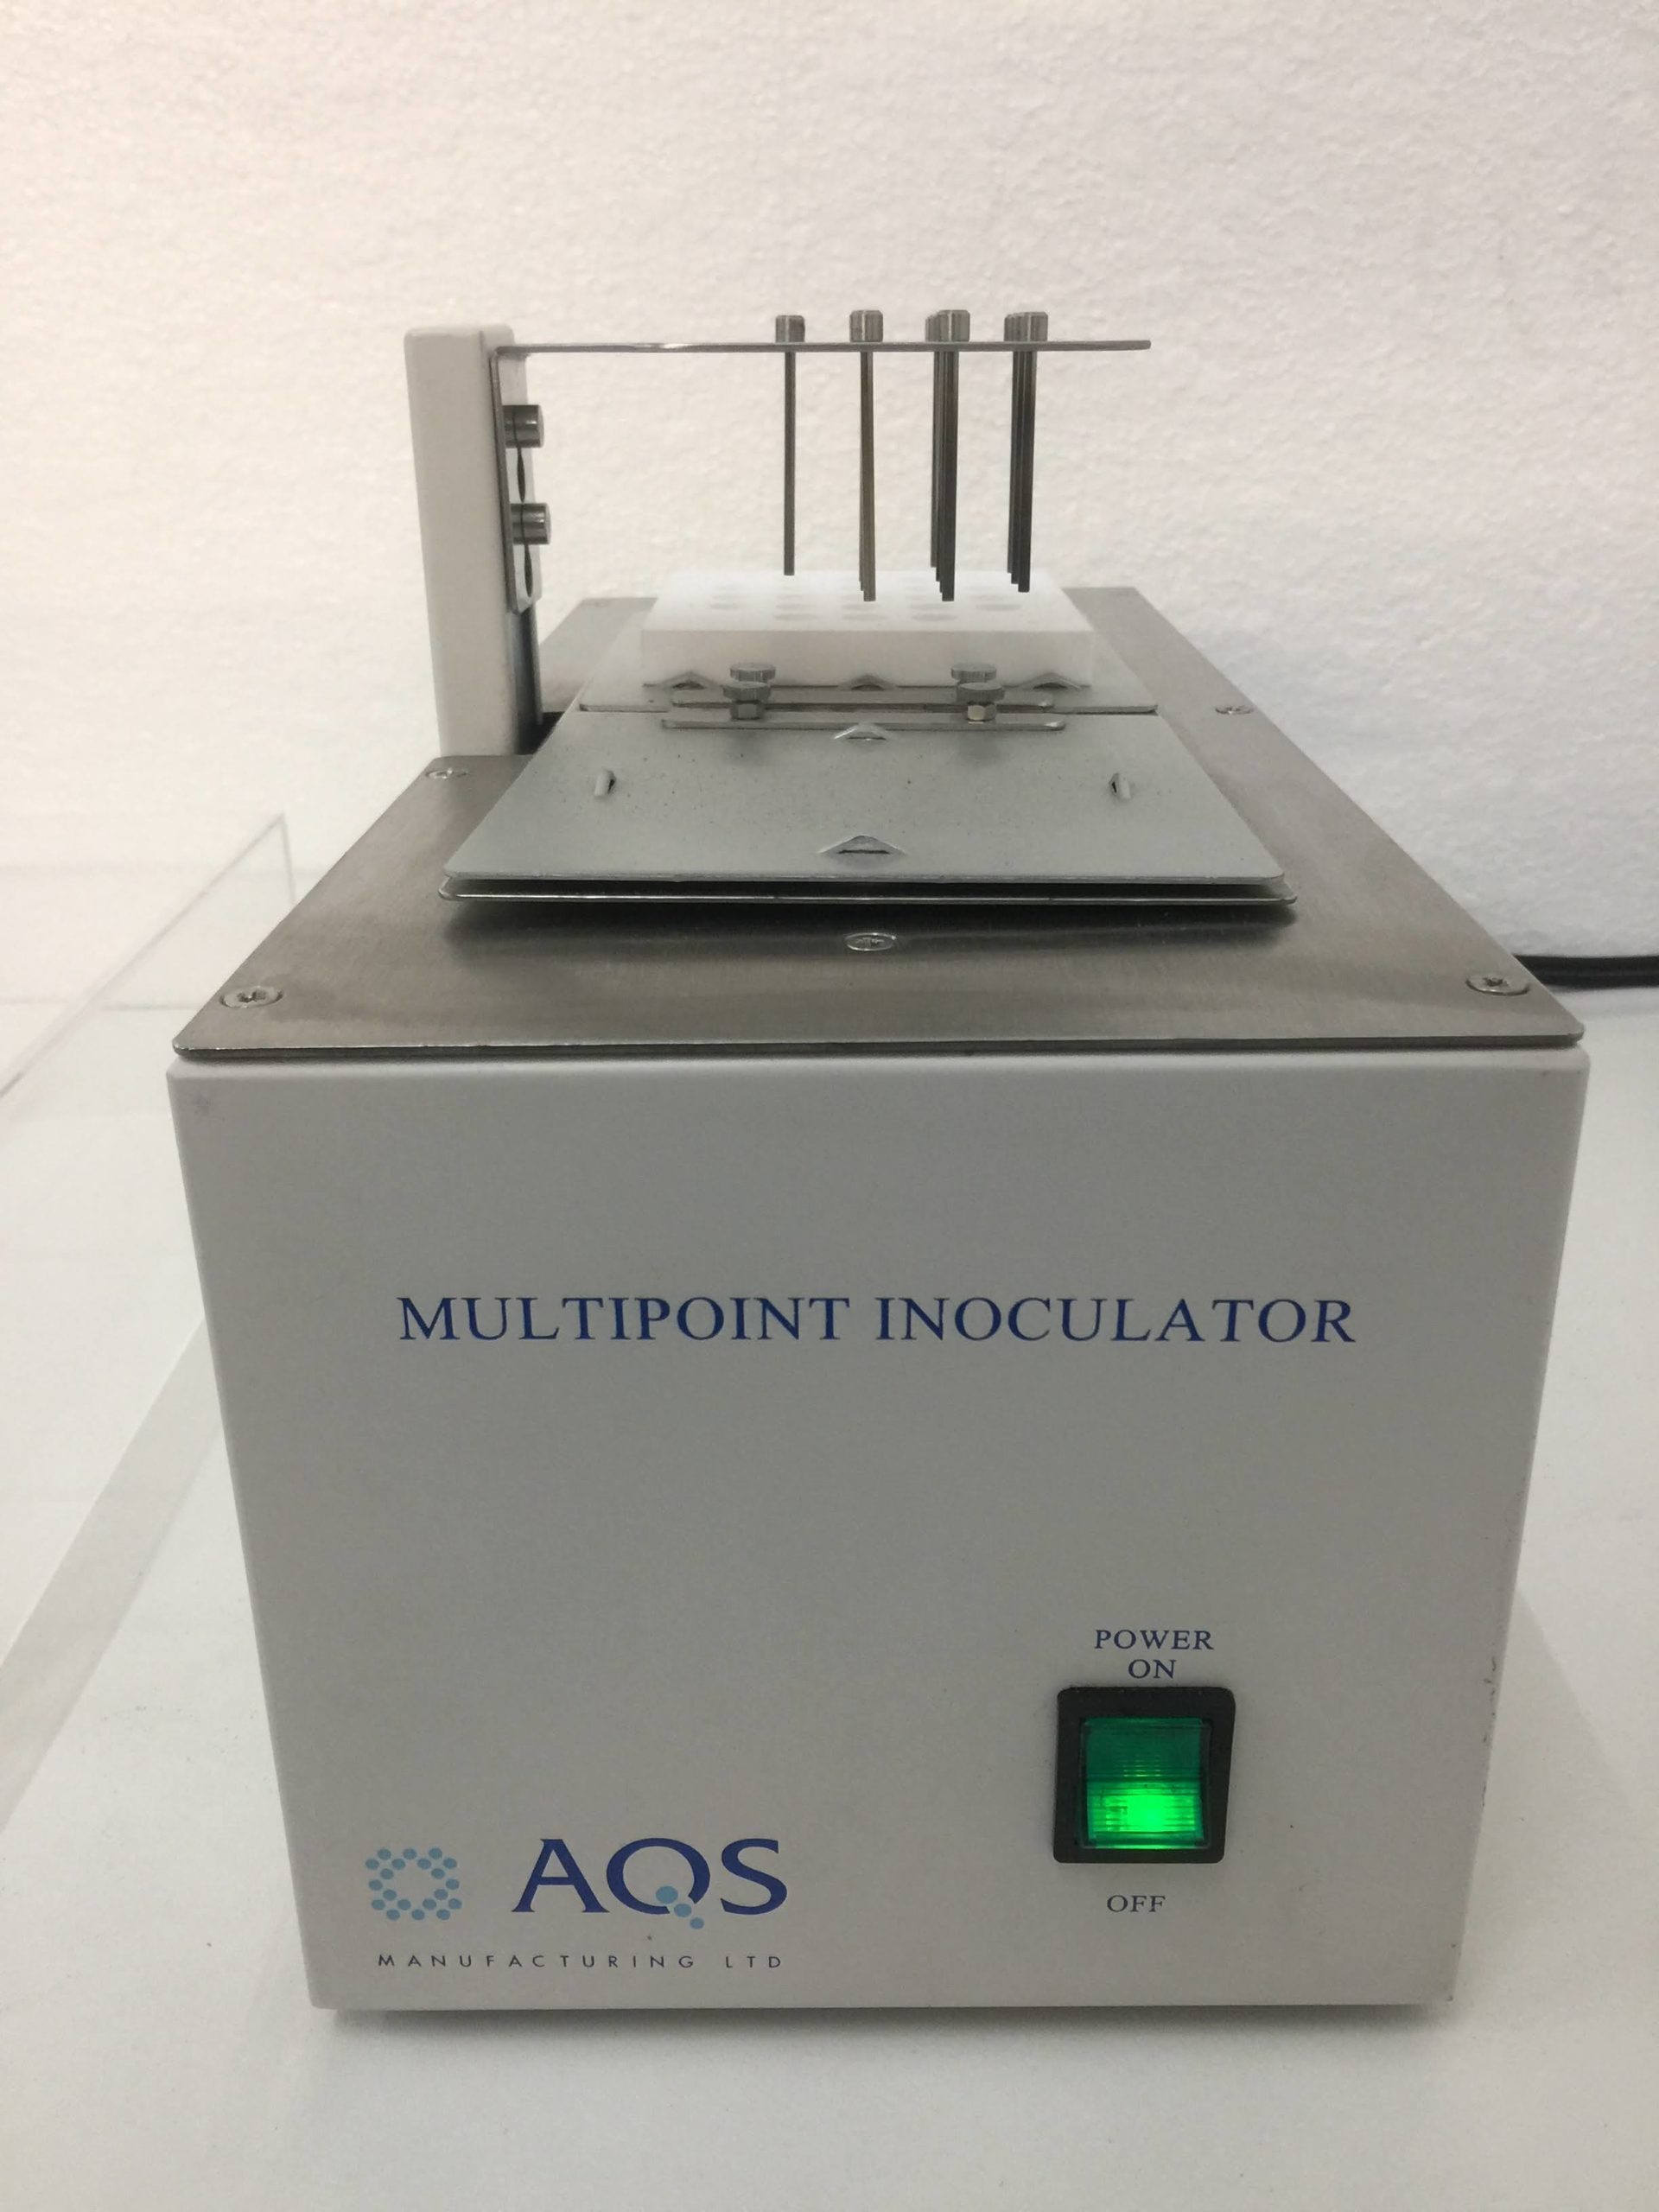 aqs multipoint inoculator a400/93